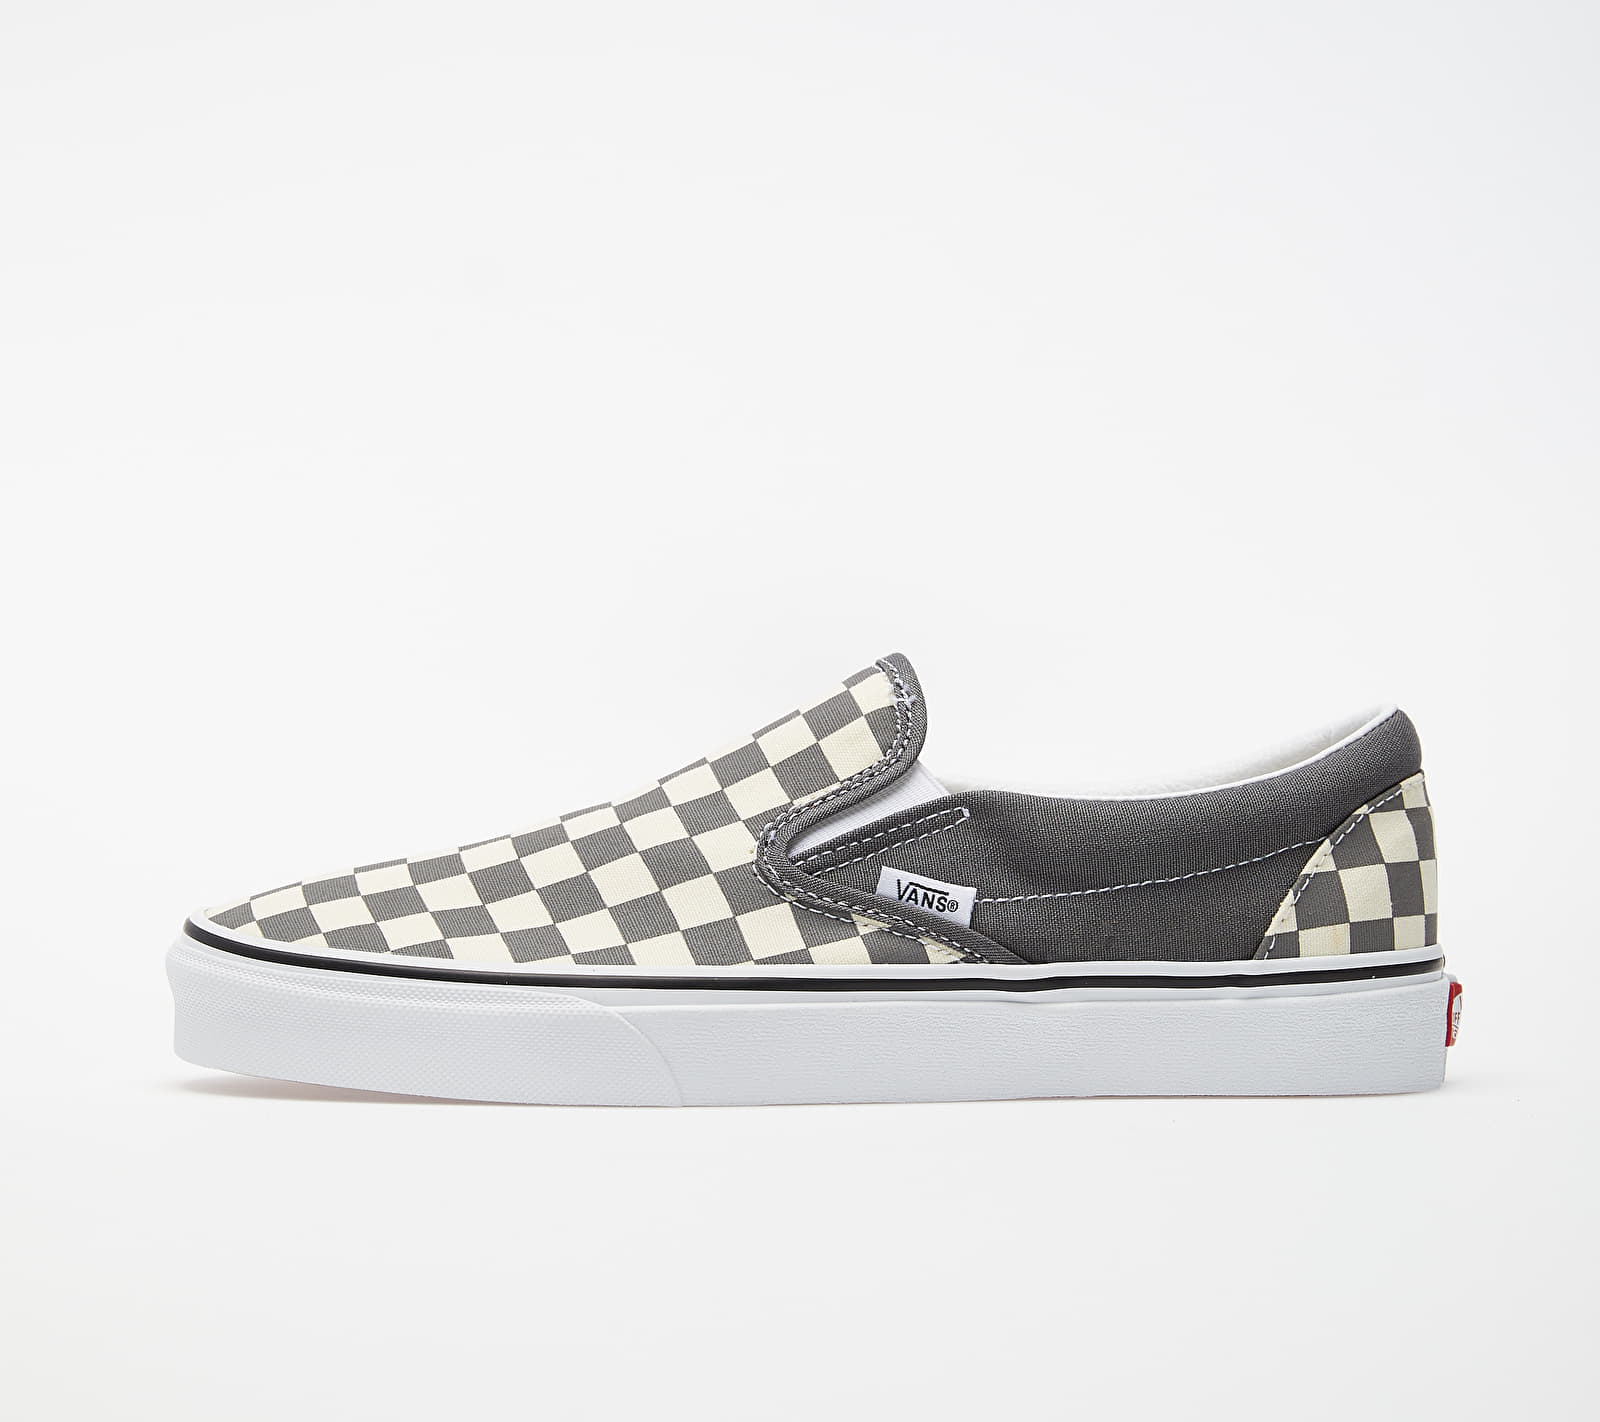 Vans Classic Slip-On (Checkerboard) Pewter/ True White VN0A4BV3TB51